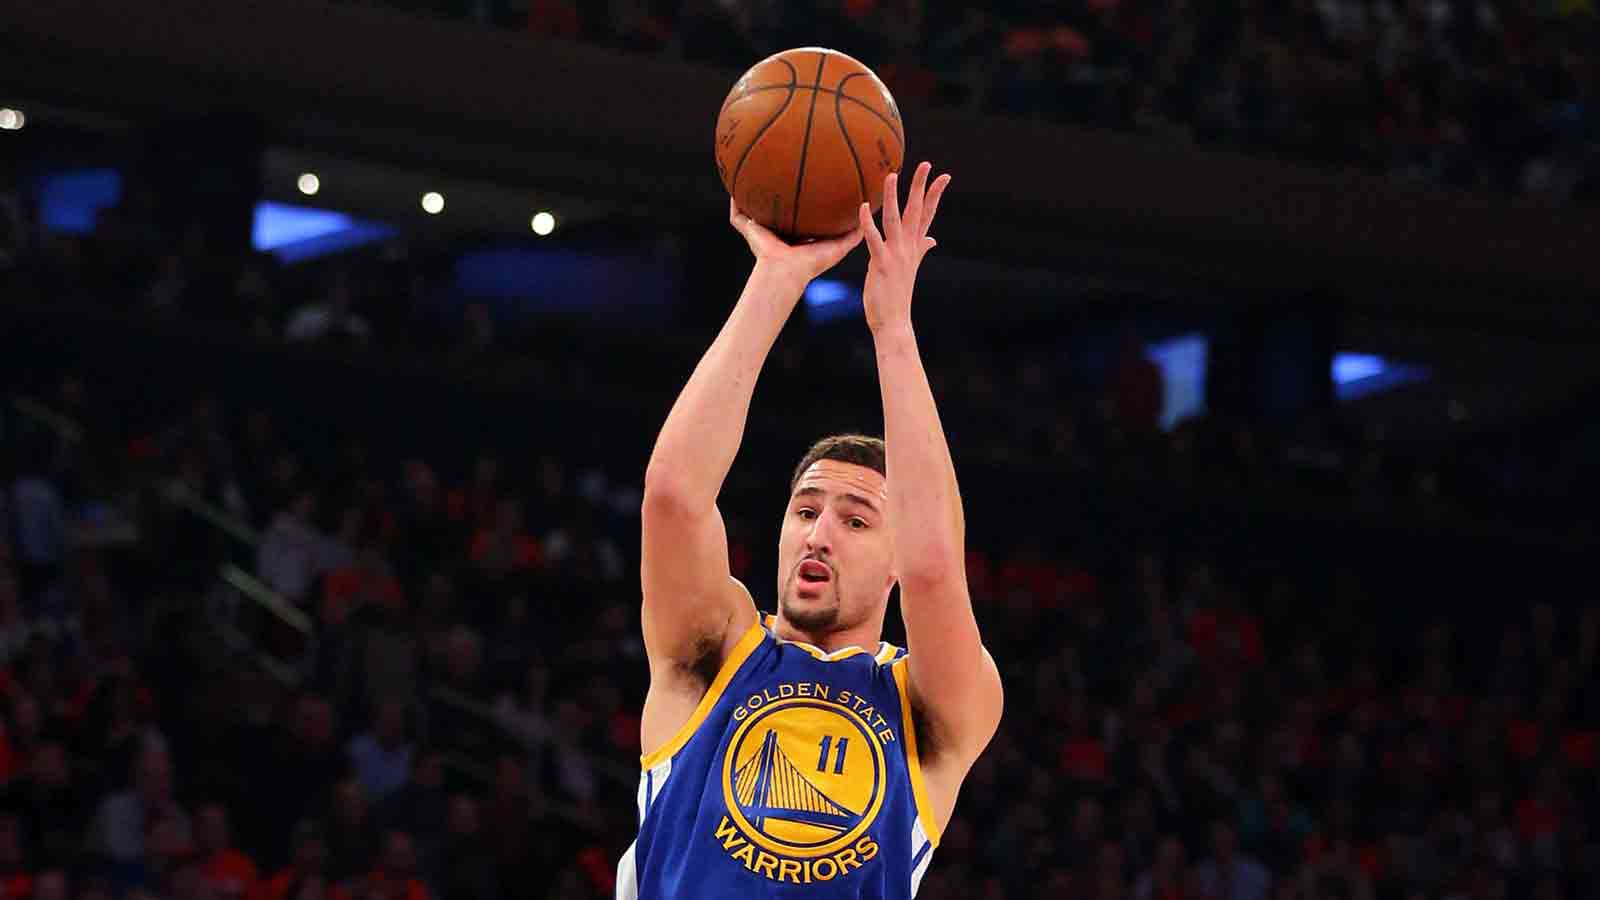 Klay Thompson signed a 10-year shoe deal with Anta. Here's what it means  for his NBA career 